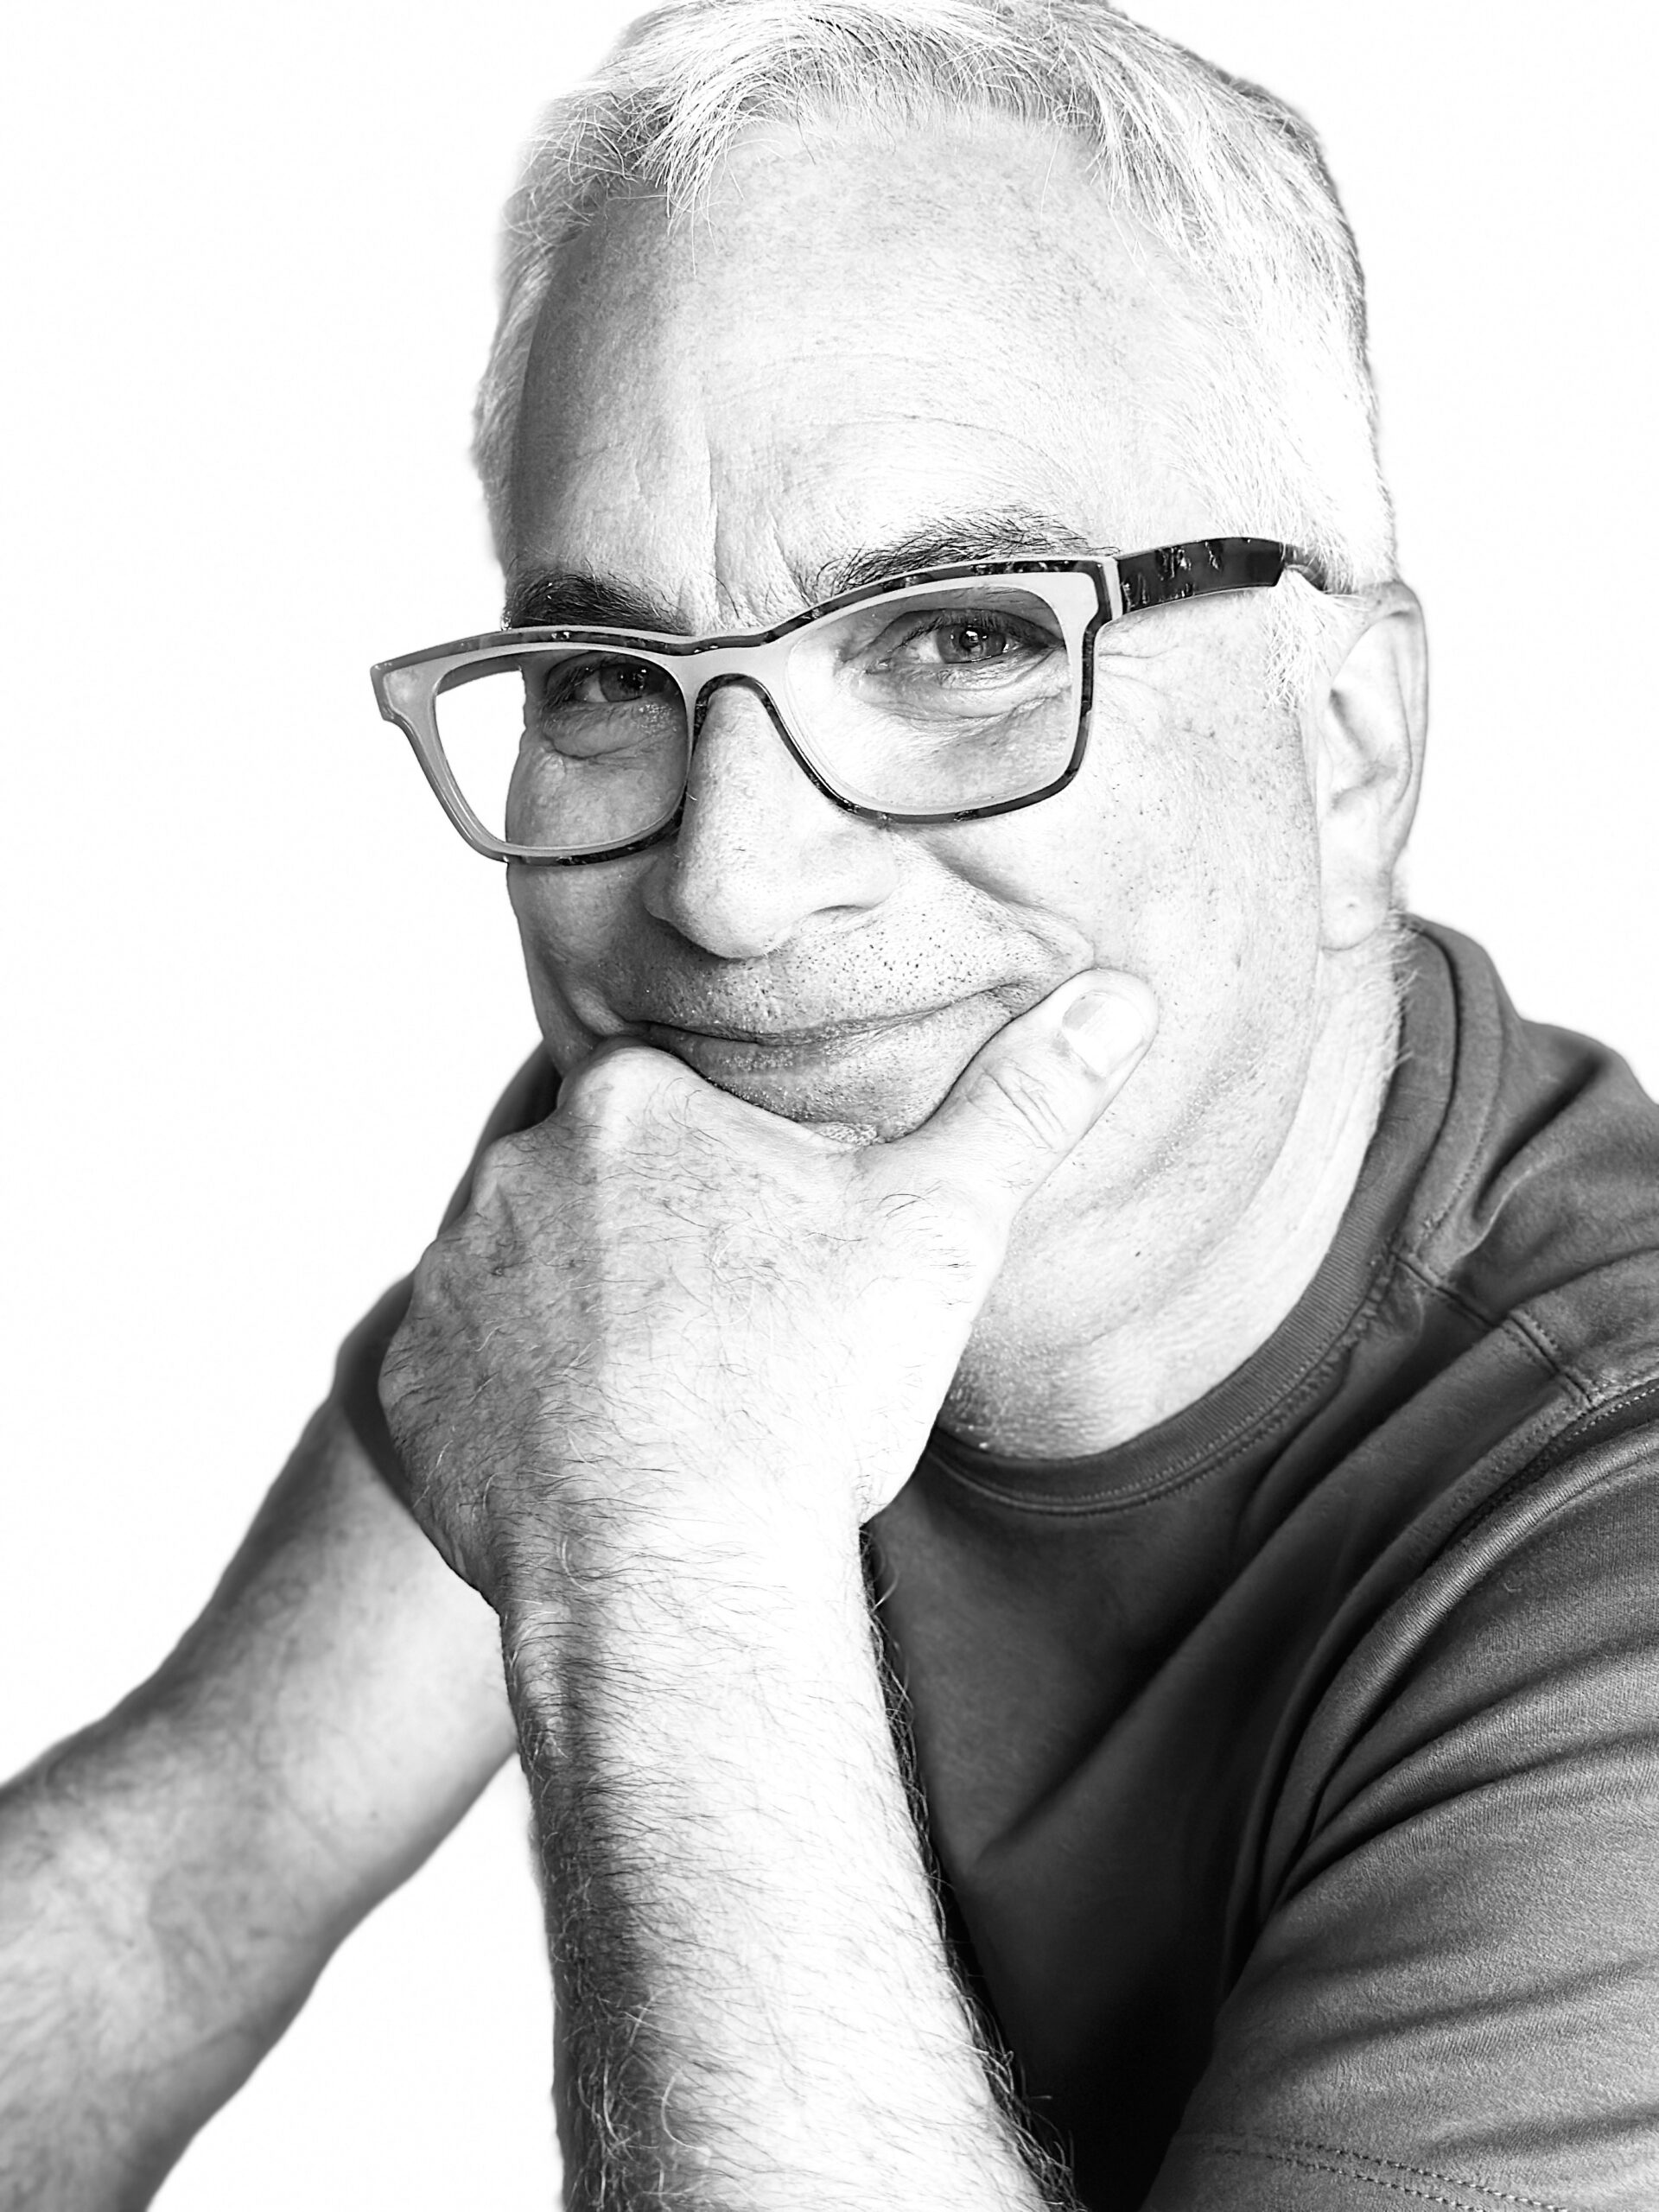 A man in glasses is posing with his hand on his chin.